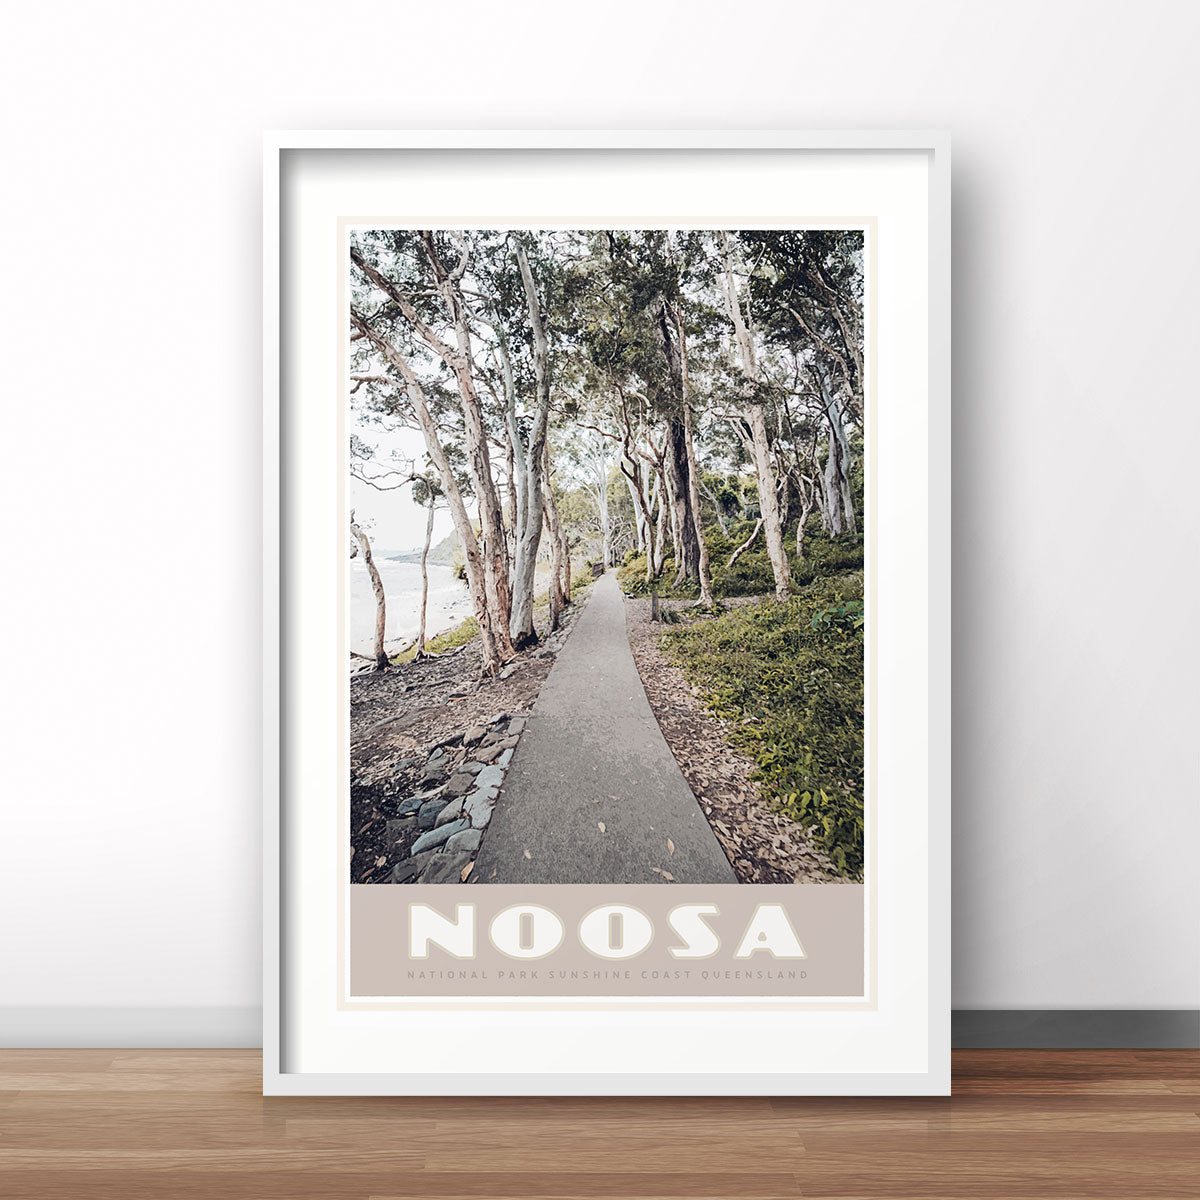 Noosa vintage travel style poster by places we luv